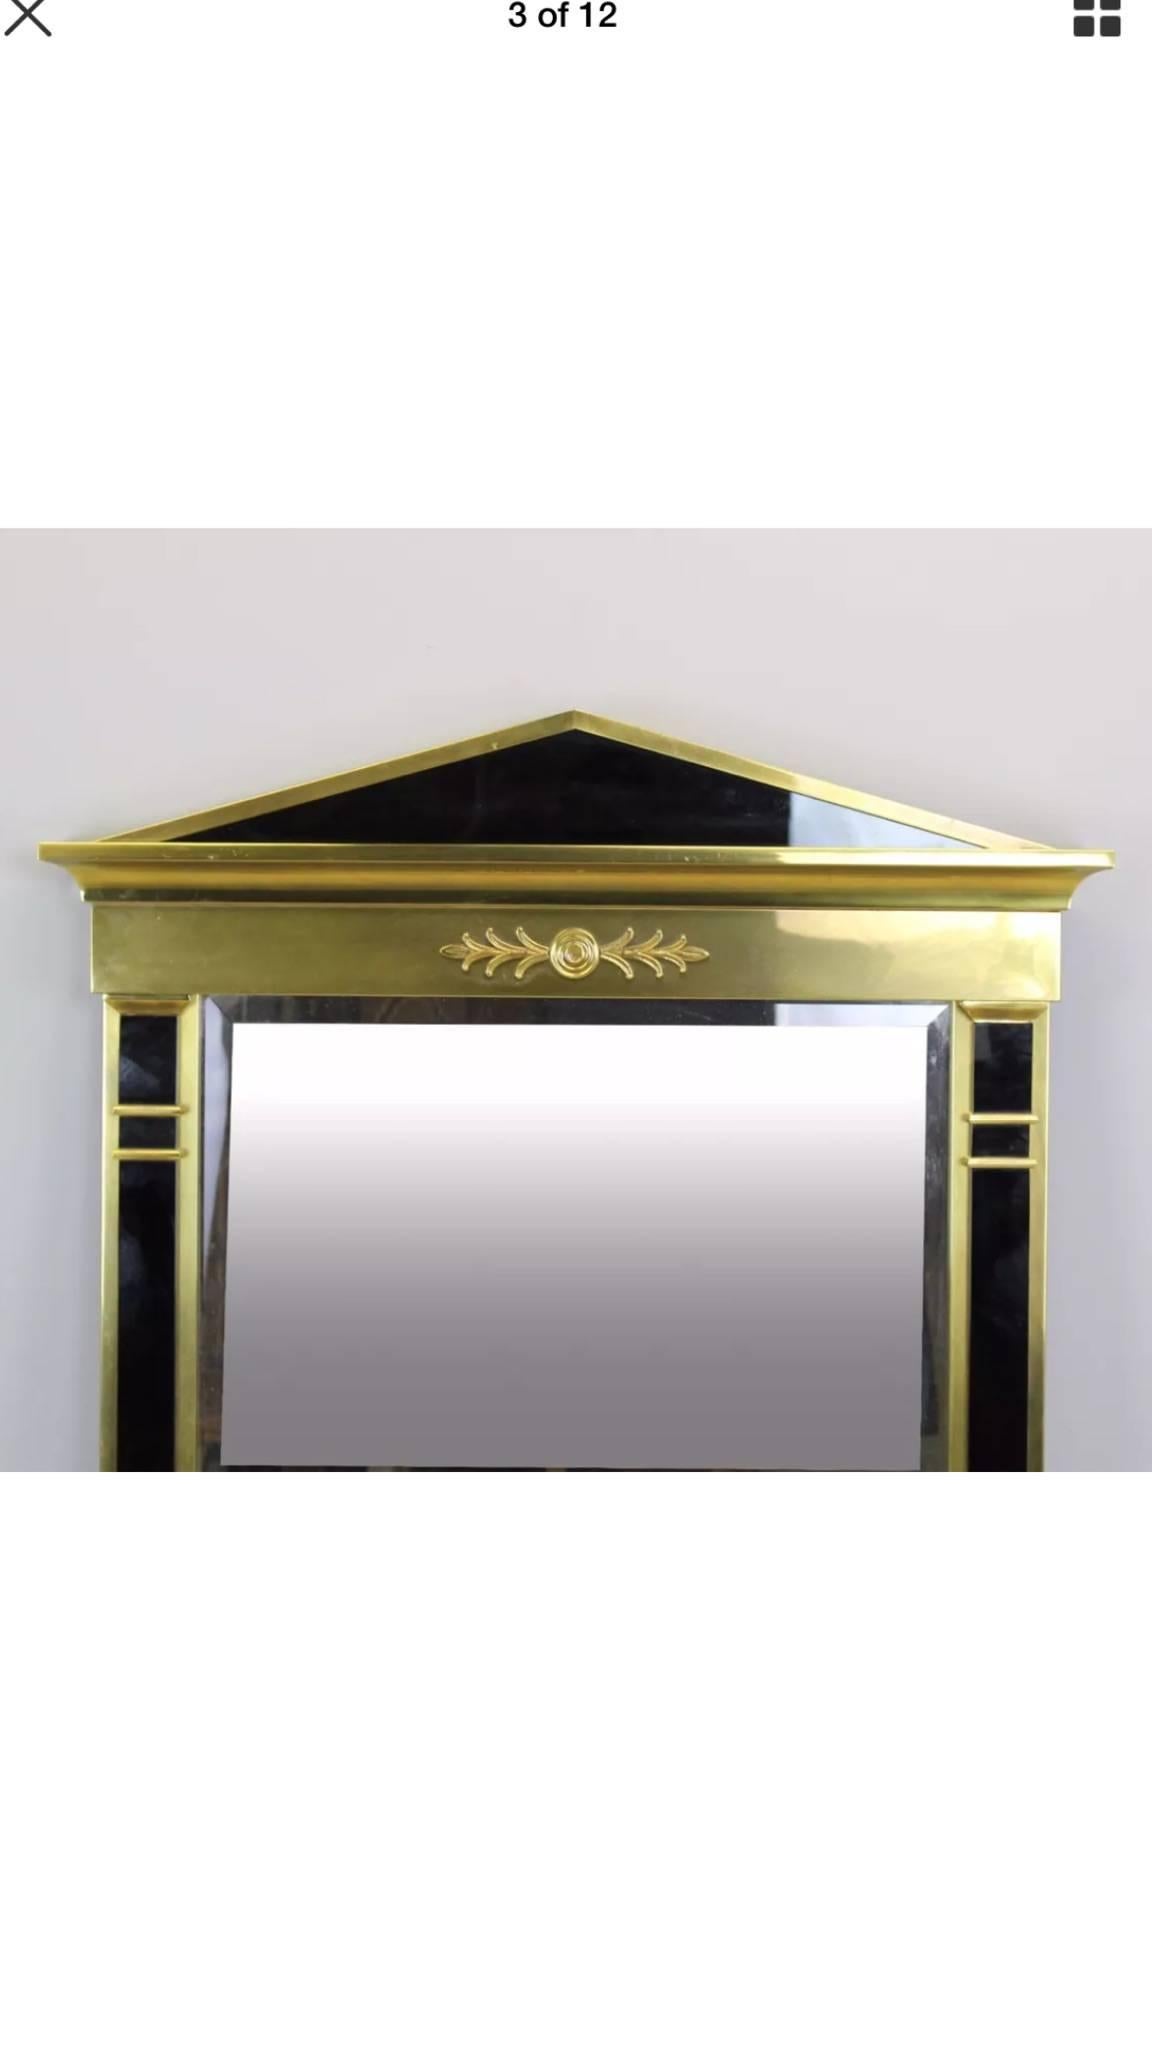 American Mastercraft Modern Empire Style Brass and Black Lucite Mirror For Sale